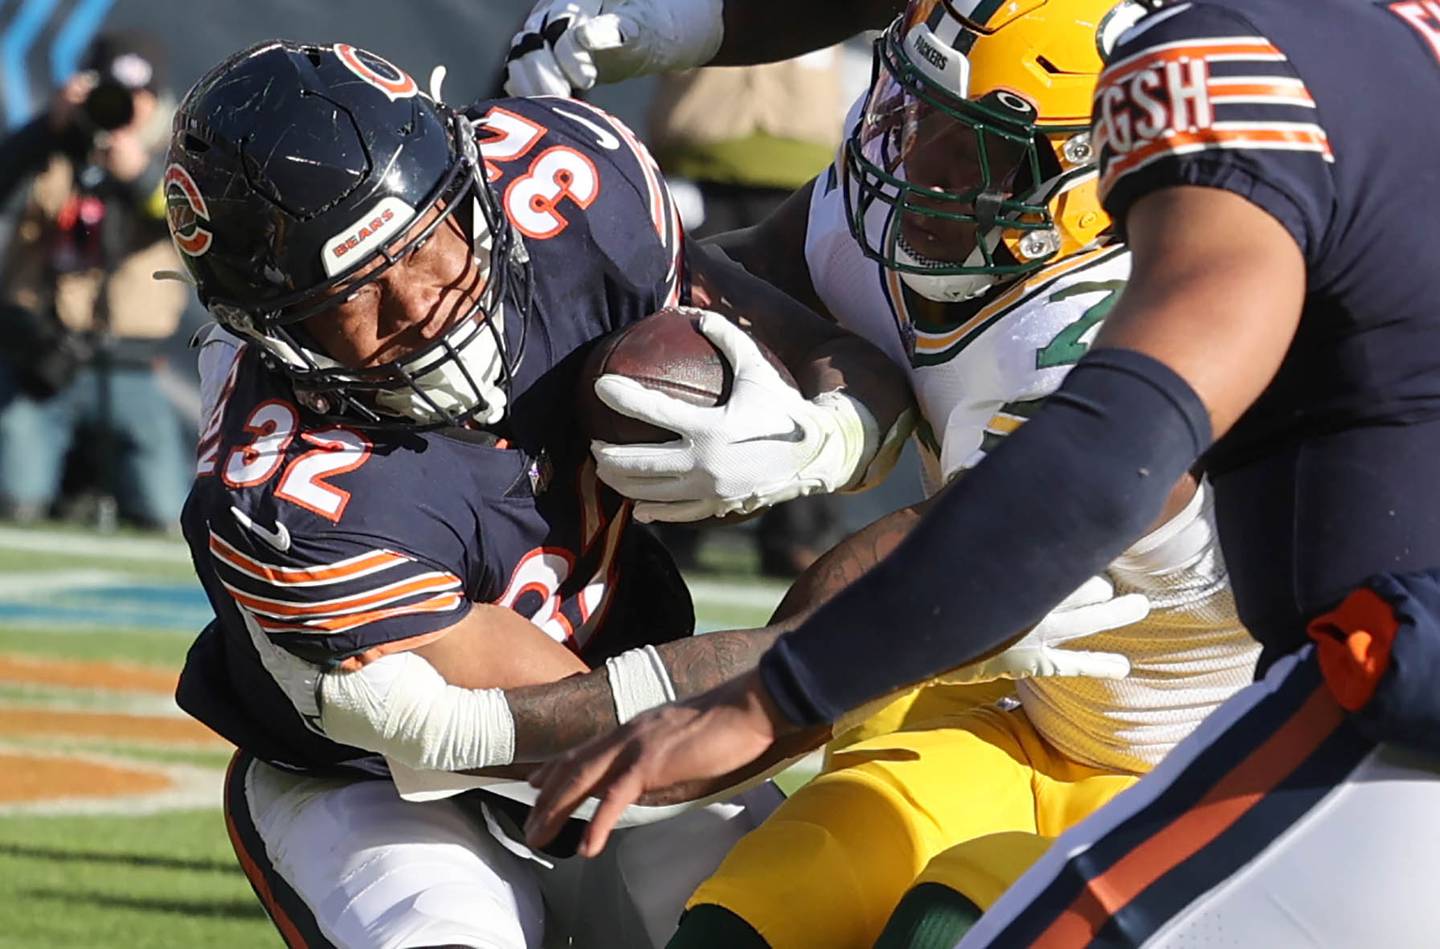 Chicago Bears David Montgomery fights through the Green Bay offensive line for a touchdown during their game Sunday, Dec. 4, 2022, at Soldier Field in Chicago.